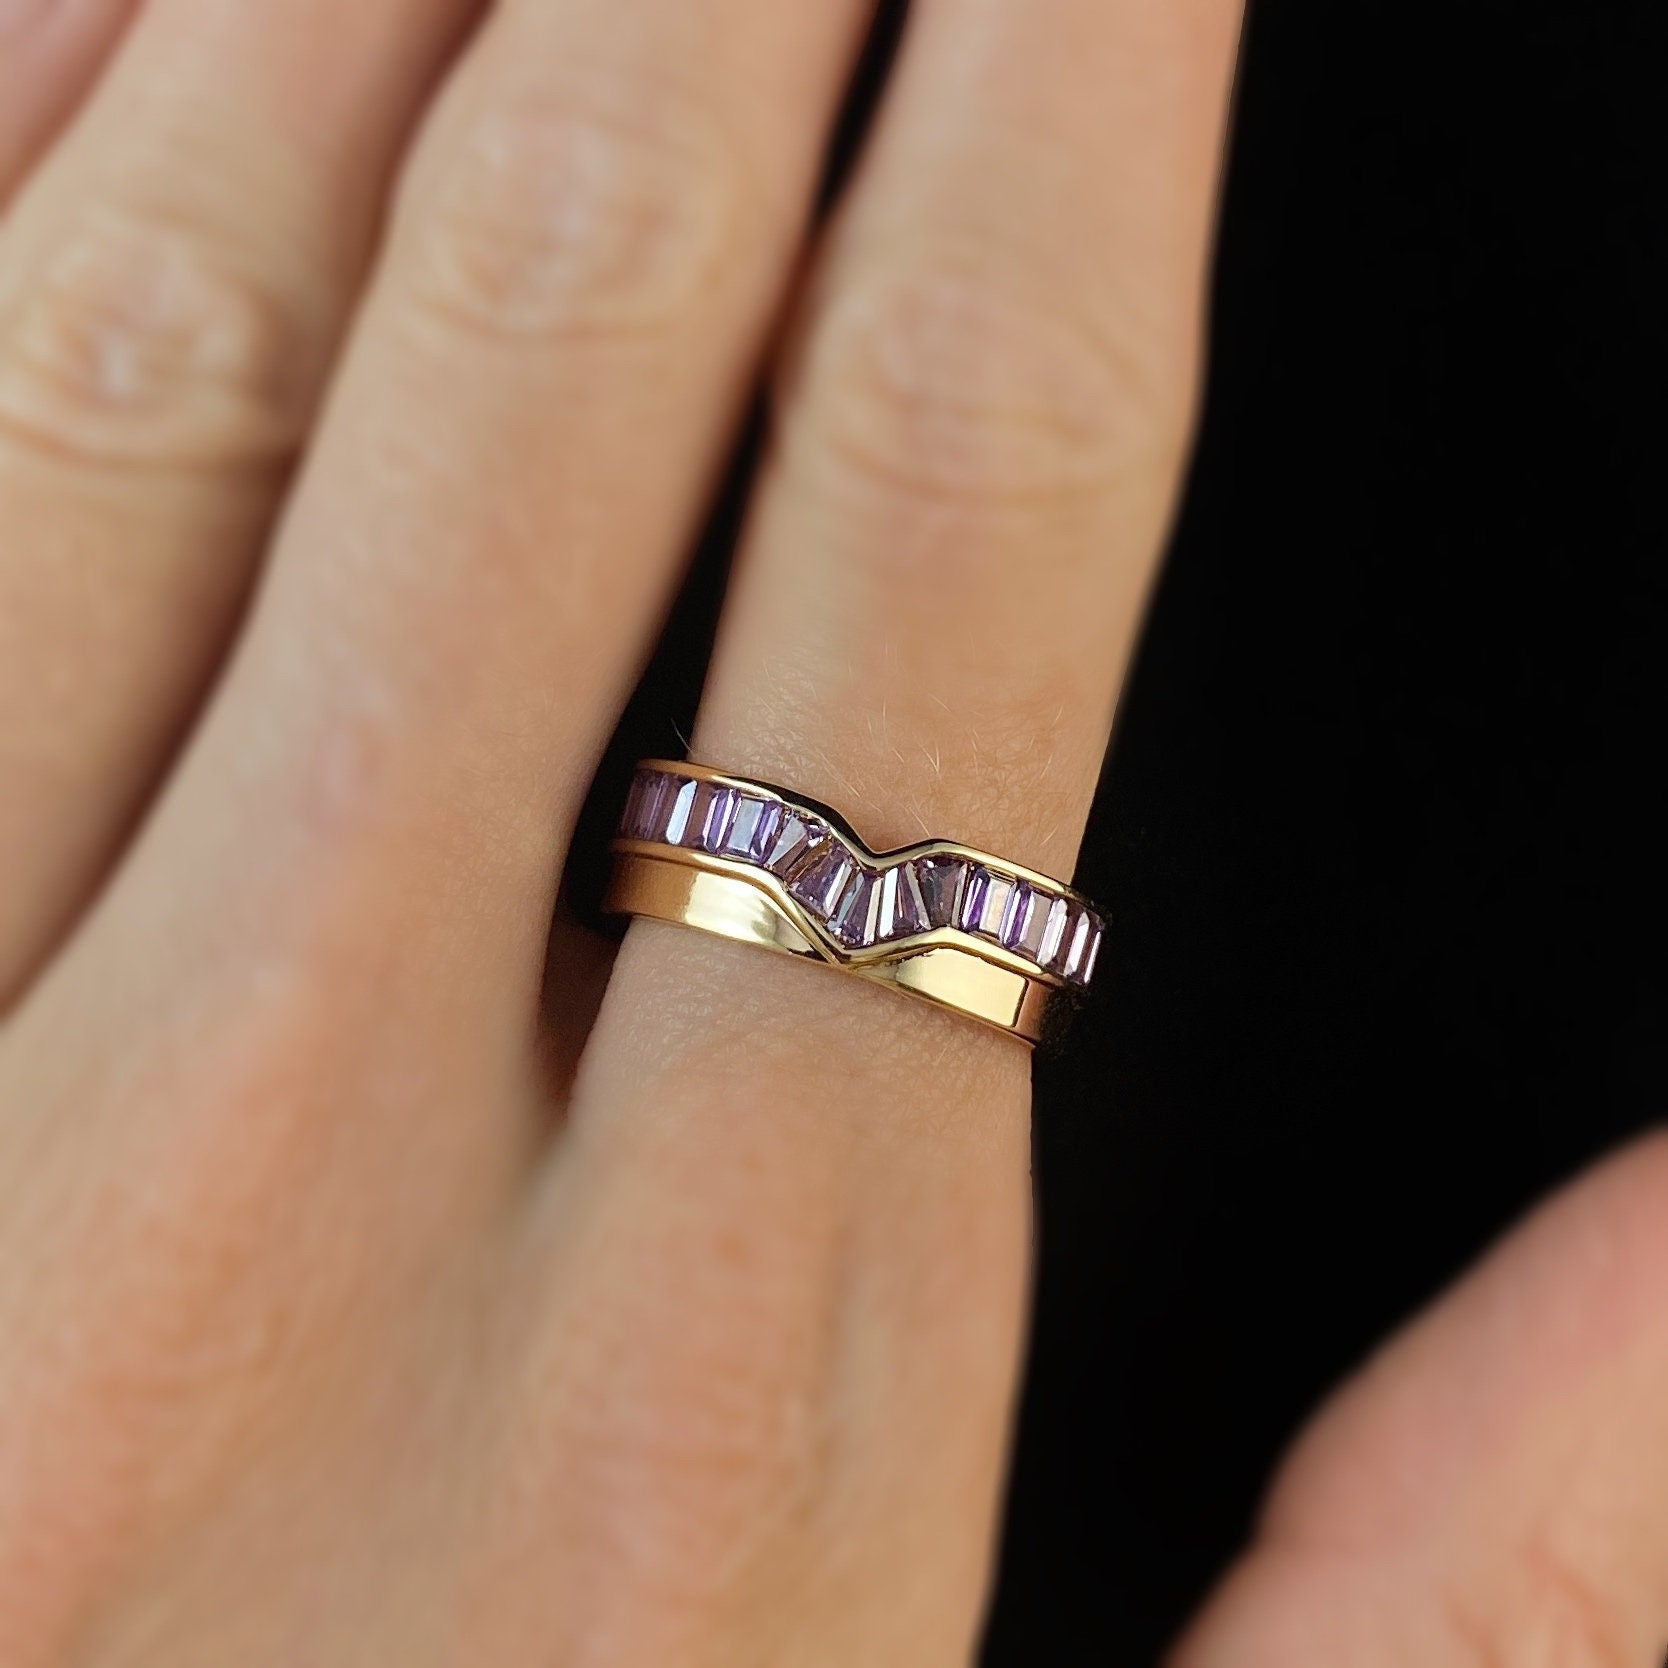 1920s Art Deco Style Gold Ring with Chevron Peak Amethyst - Size 7